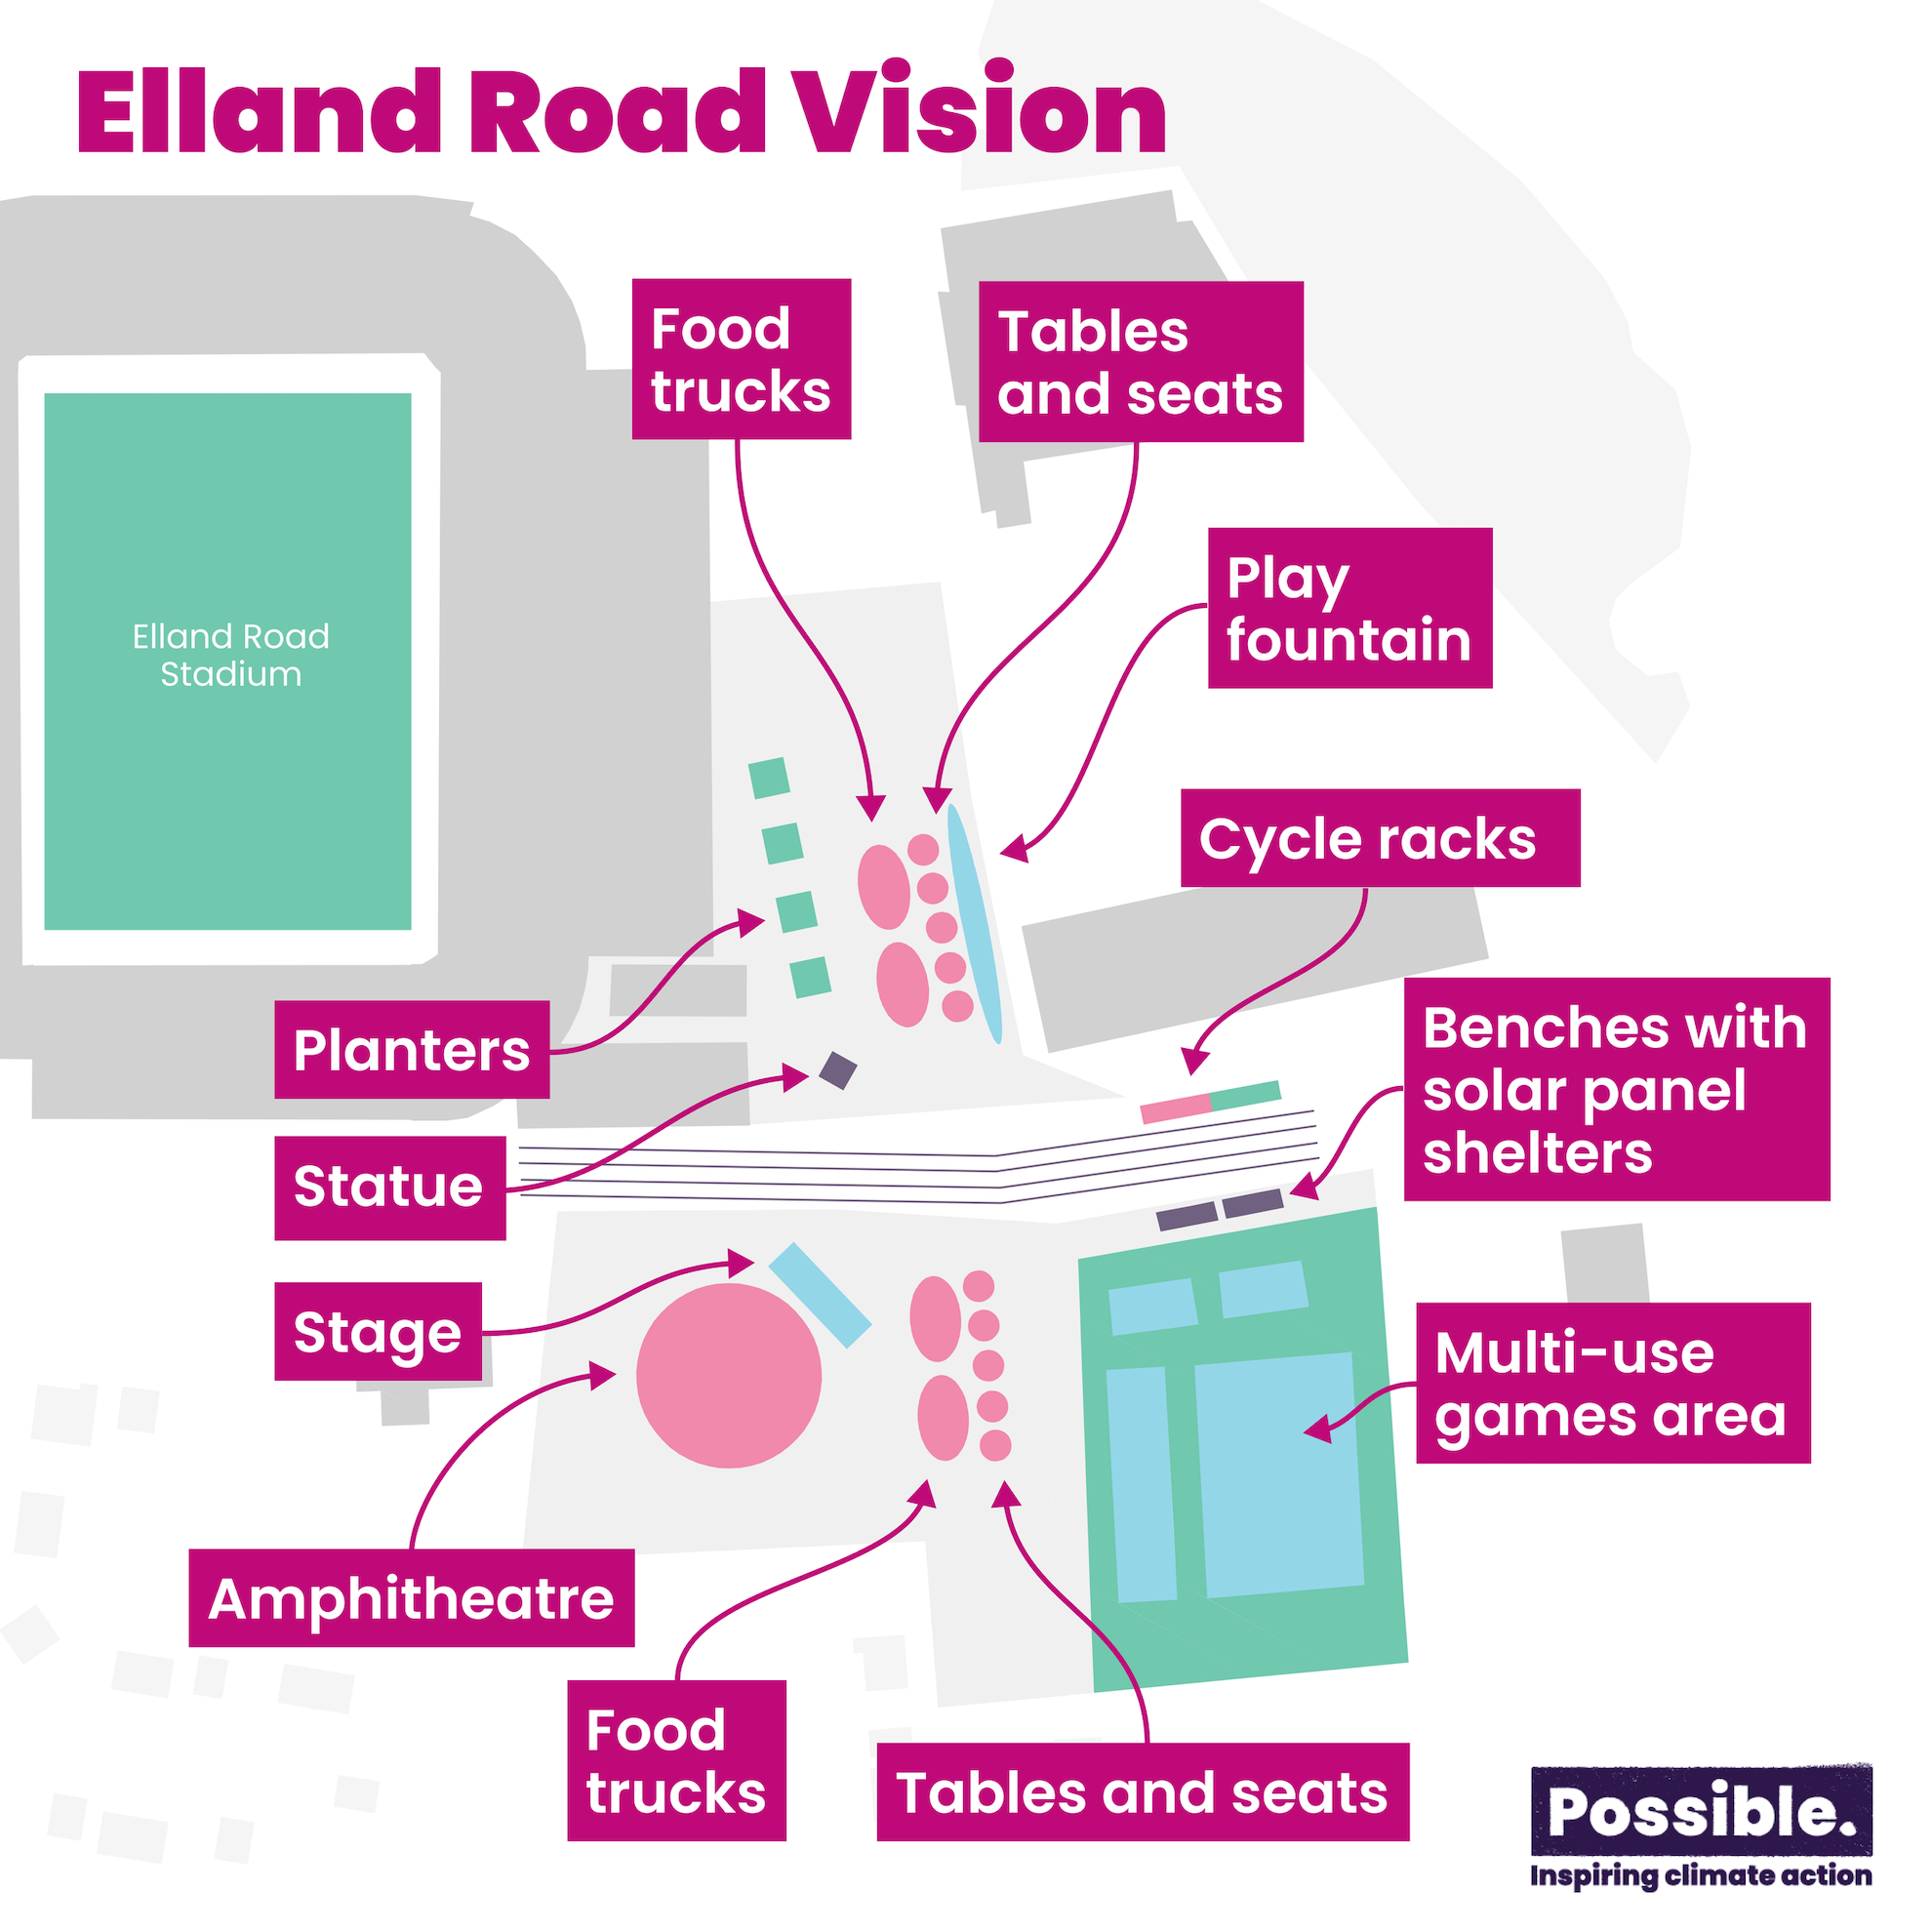 An illustrated vision of Elland Road without cars